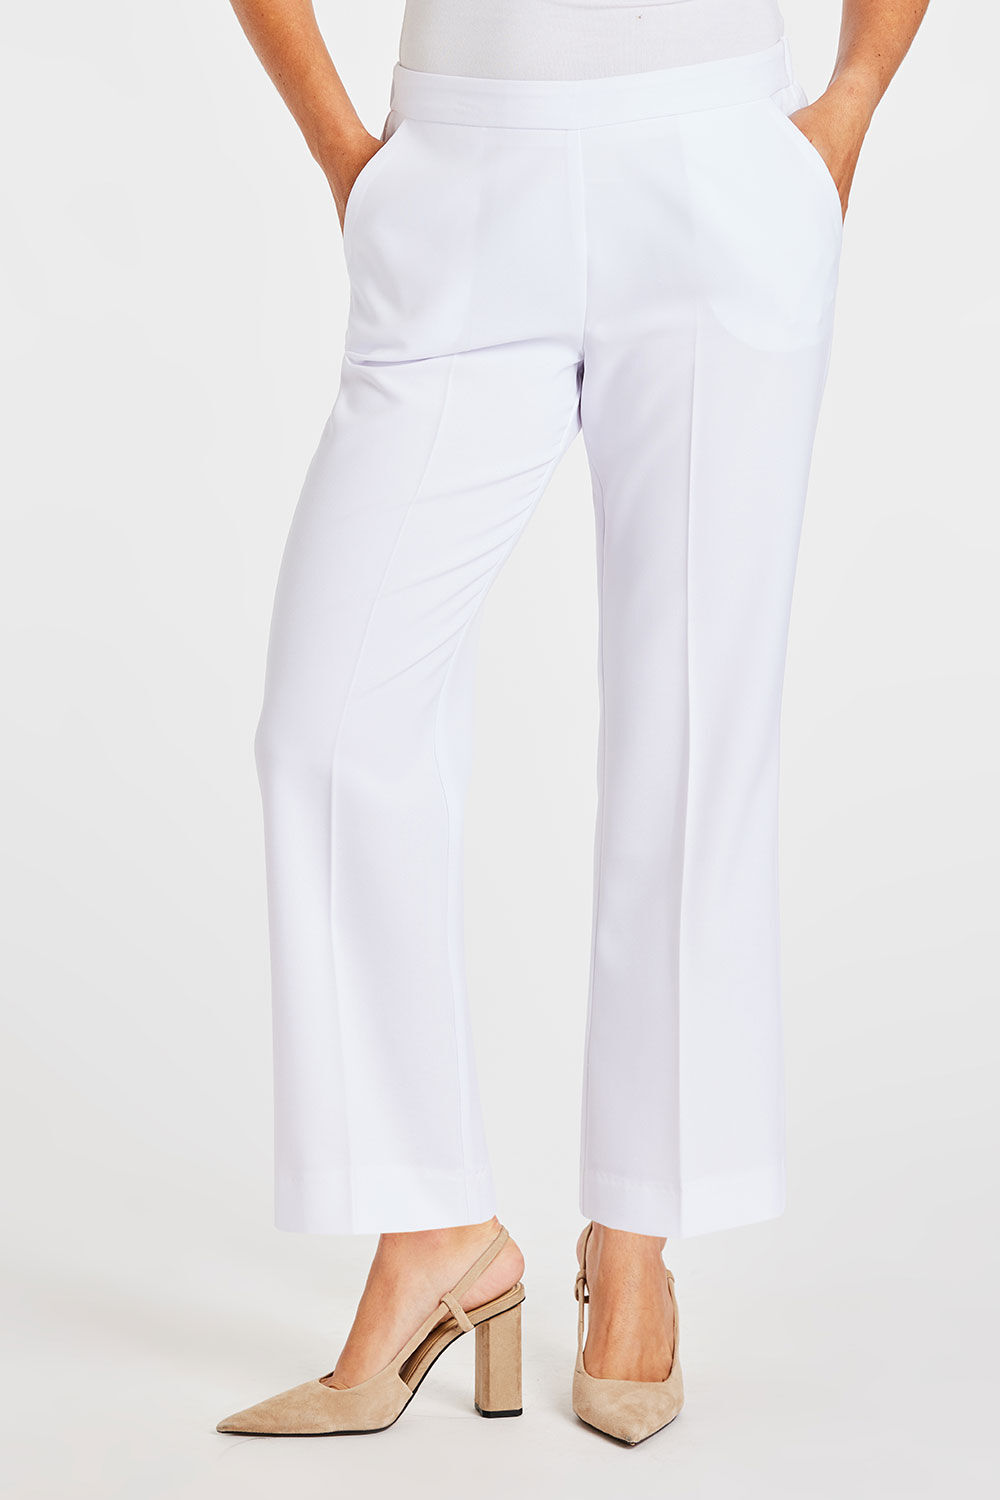 Bonmarche White Straight Leg Elasticated Pull On Trousers, Size: 12